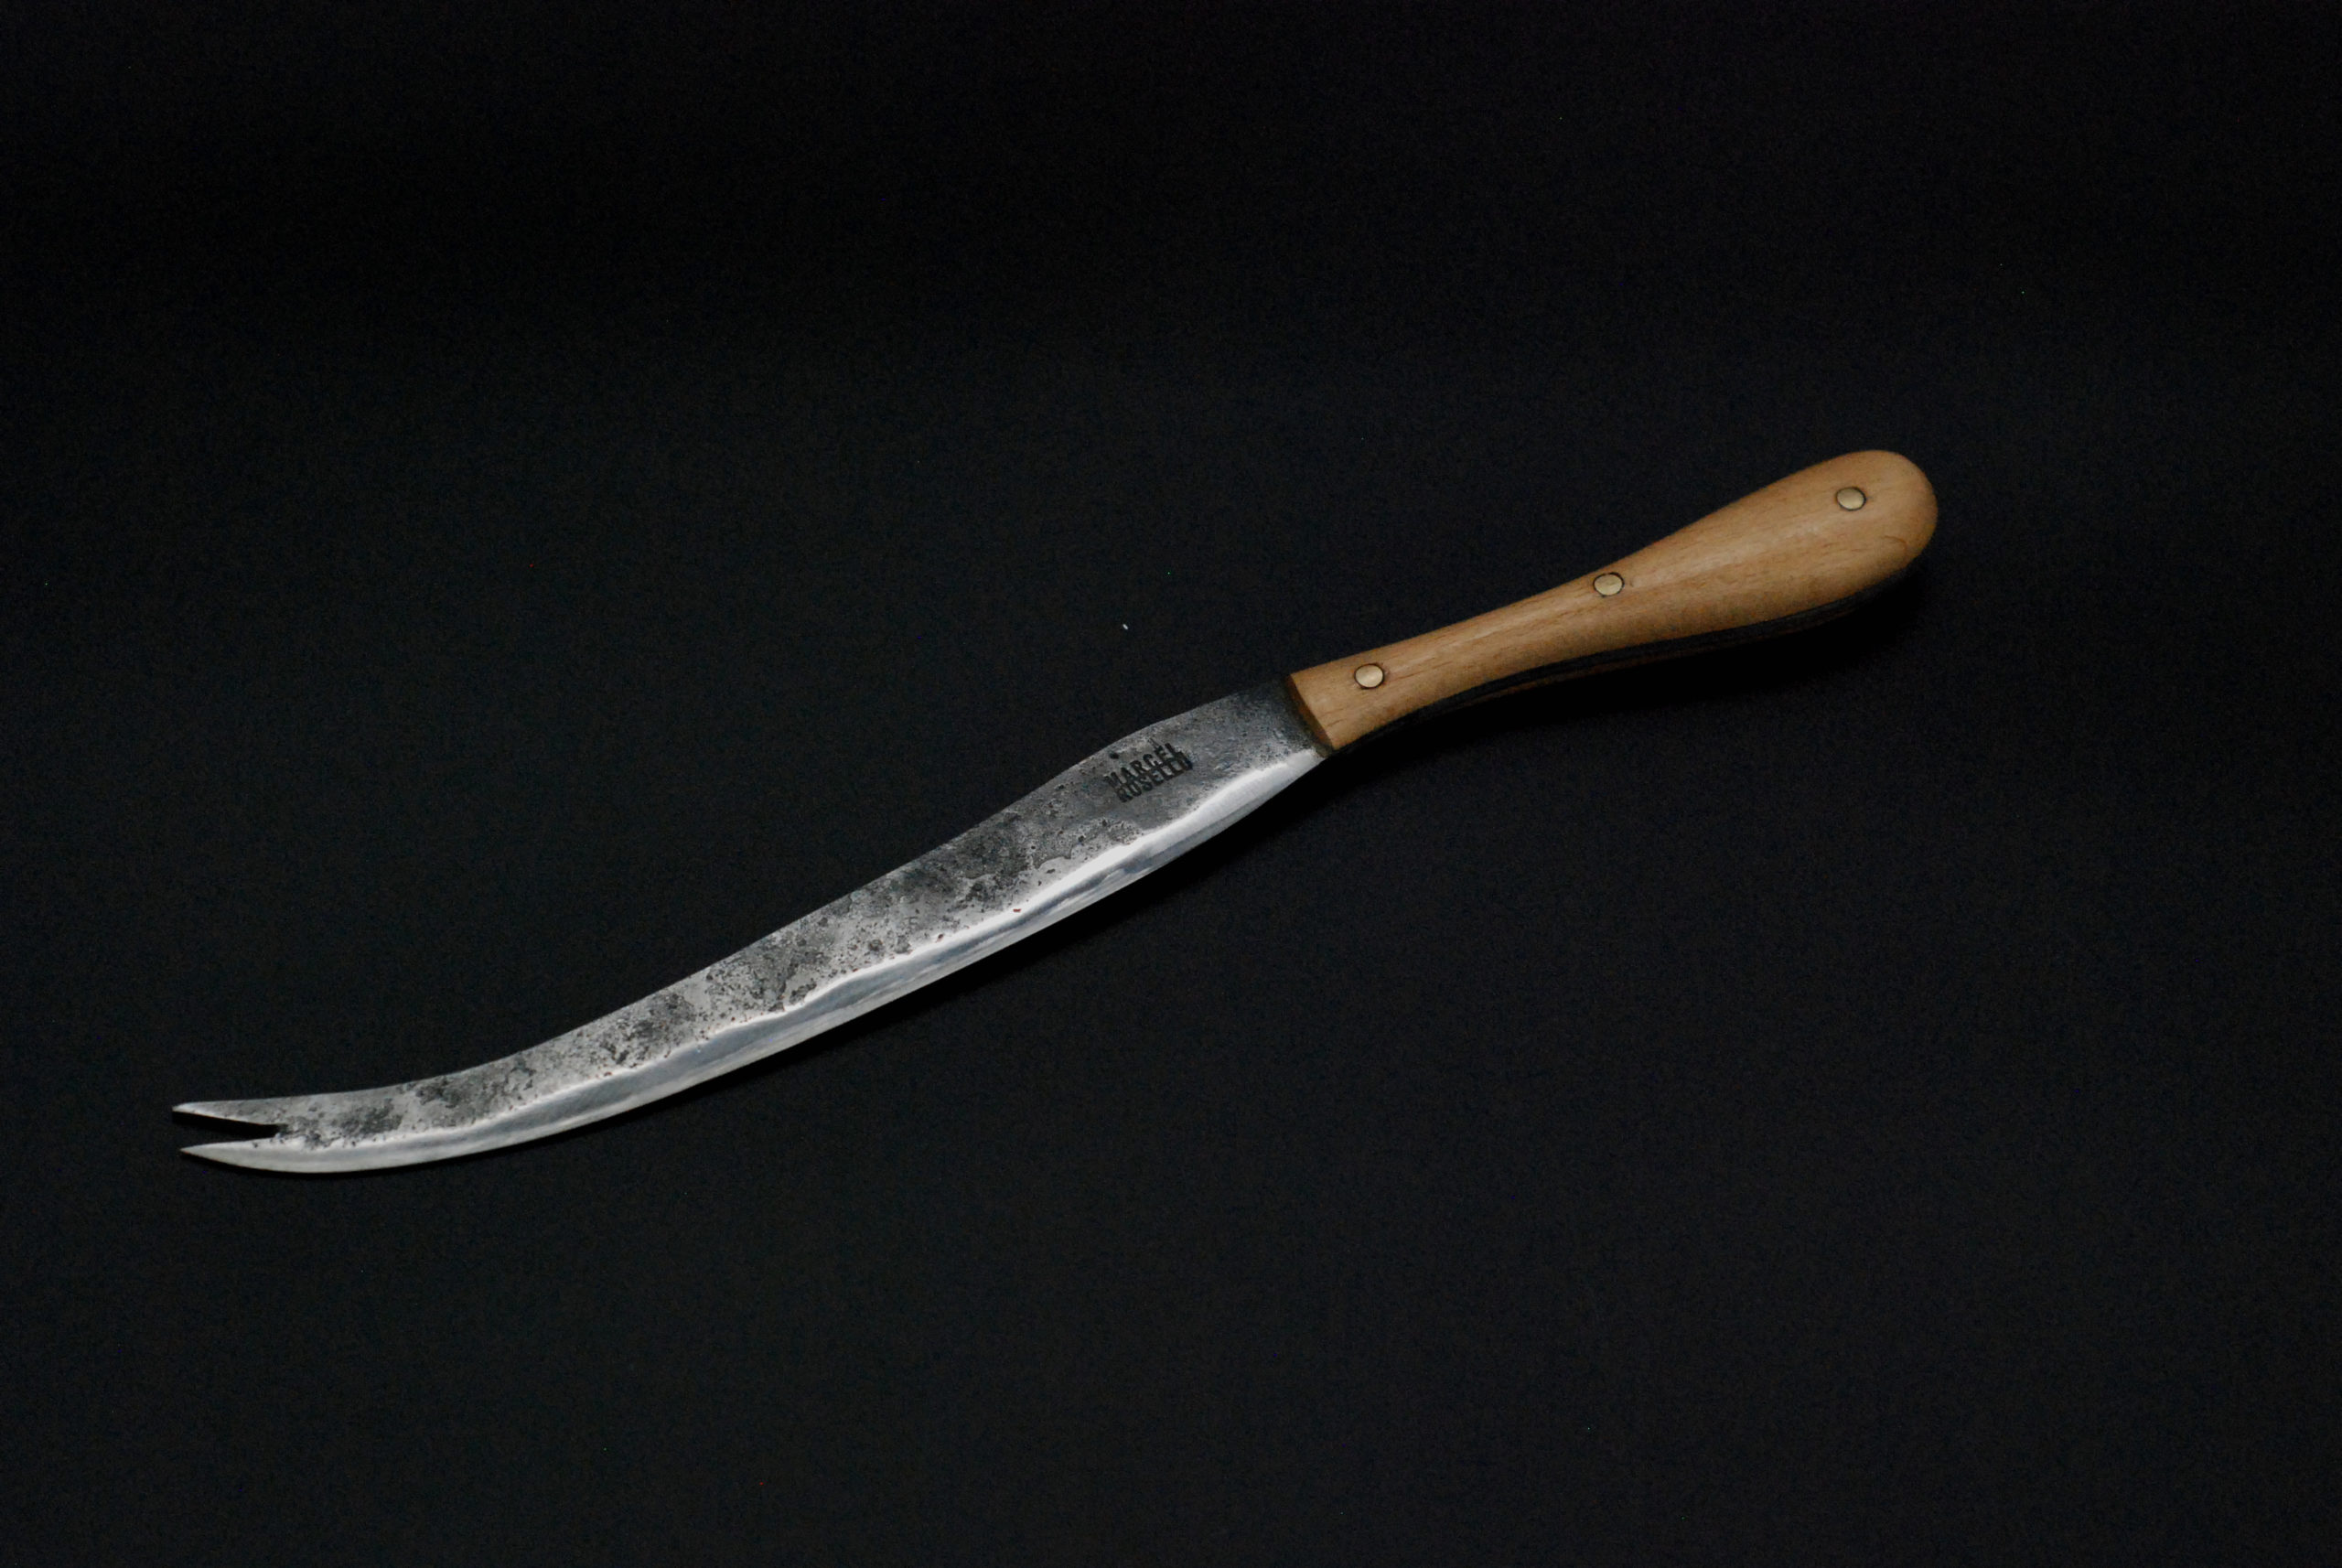 Cheese knife with fork tip. 100 mm, beech wooden handle